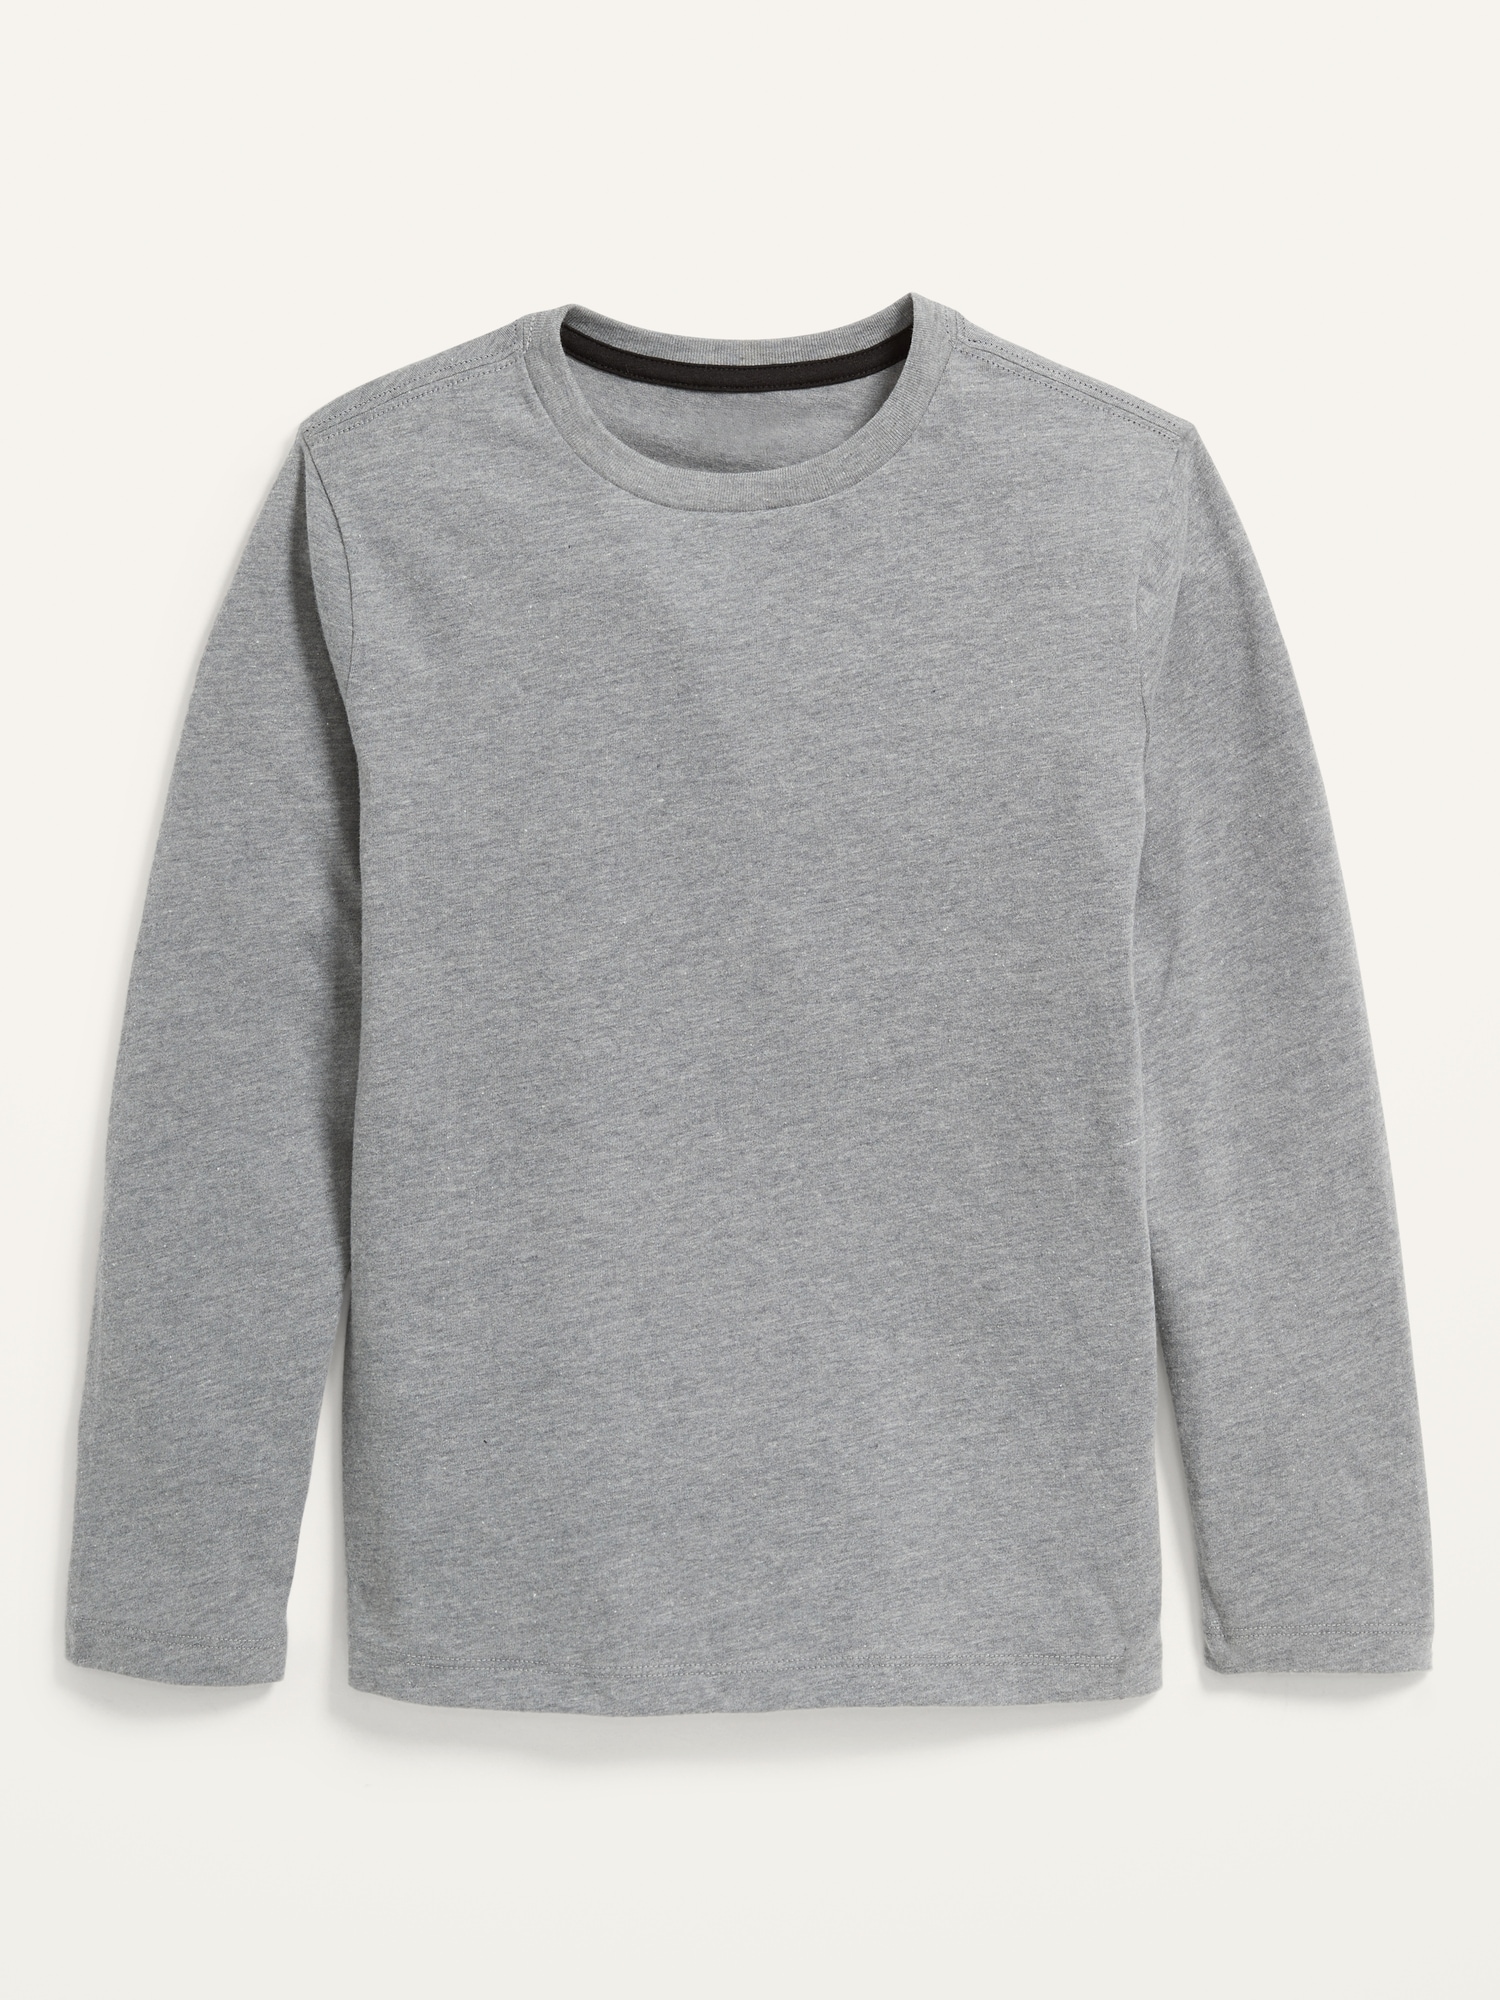 Old Navy Softest Long-Sleeve T-Shirt For Boys gray. 1